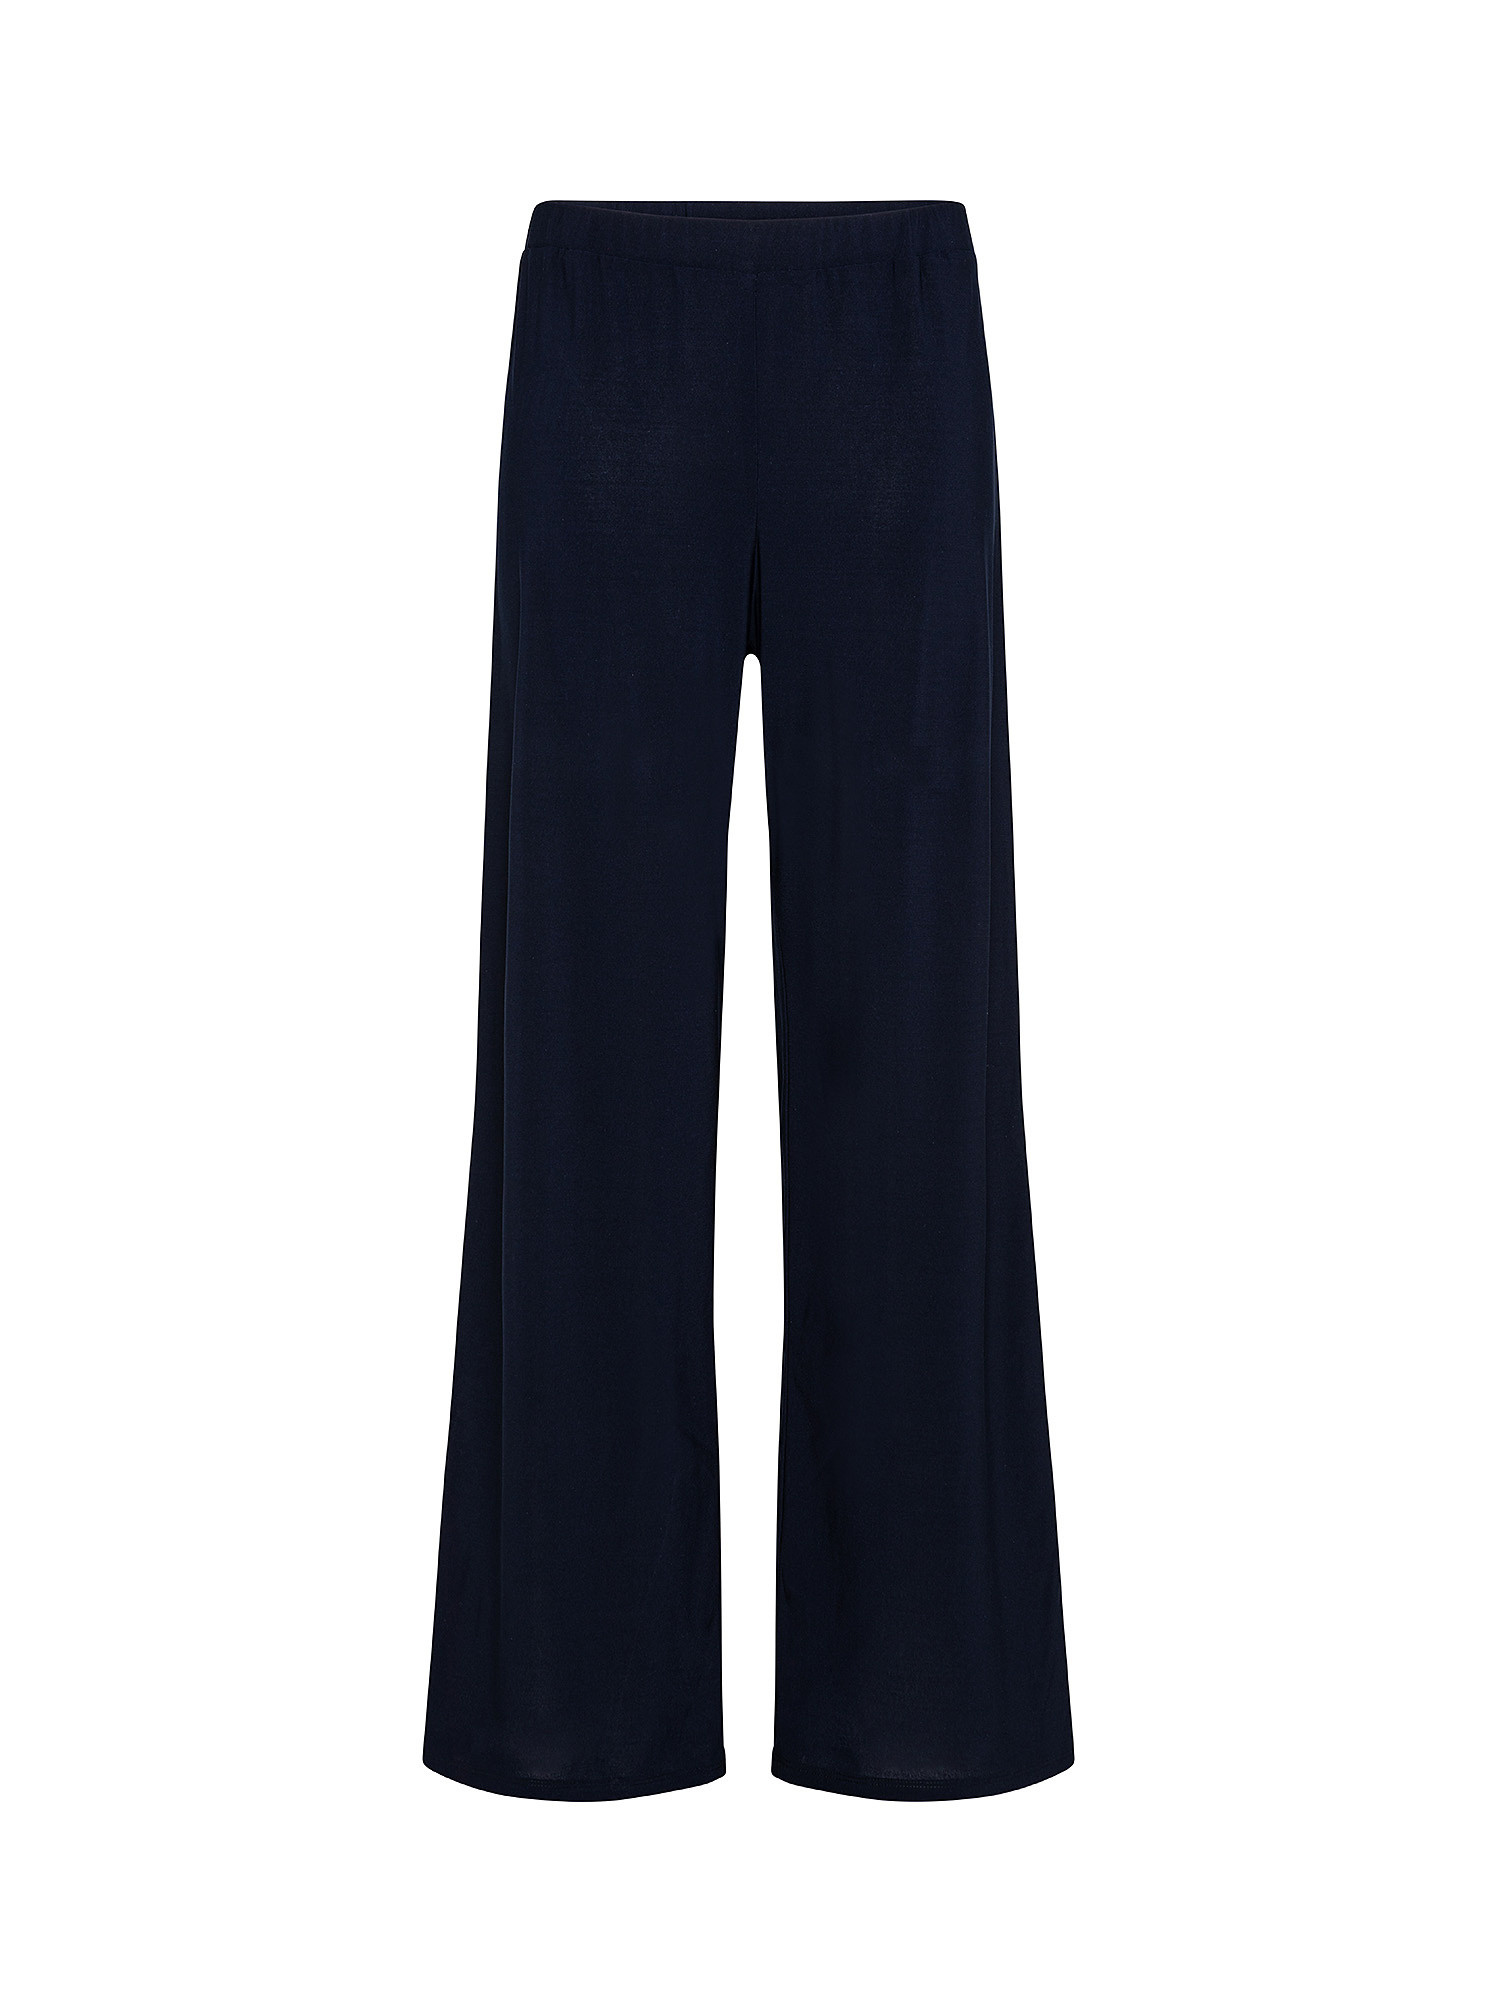 Wide leg trousers, Blue, large image number 0